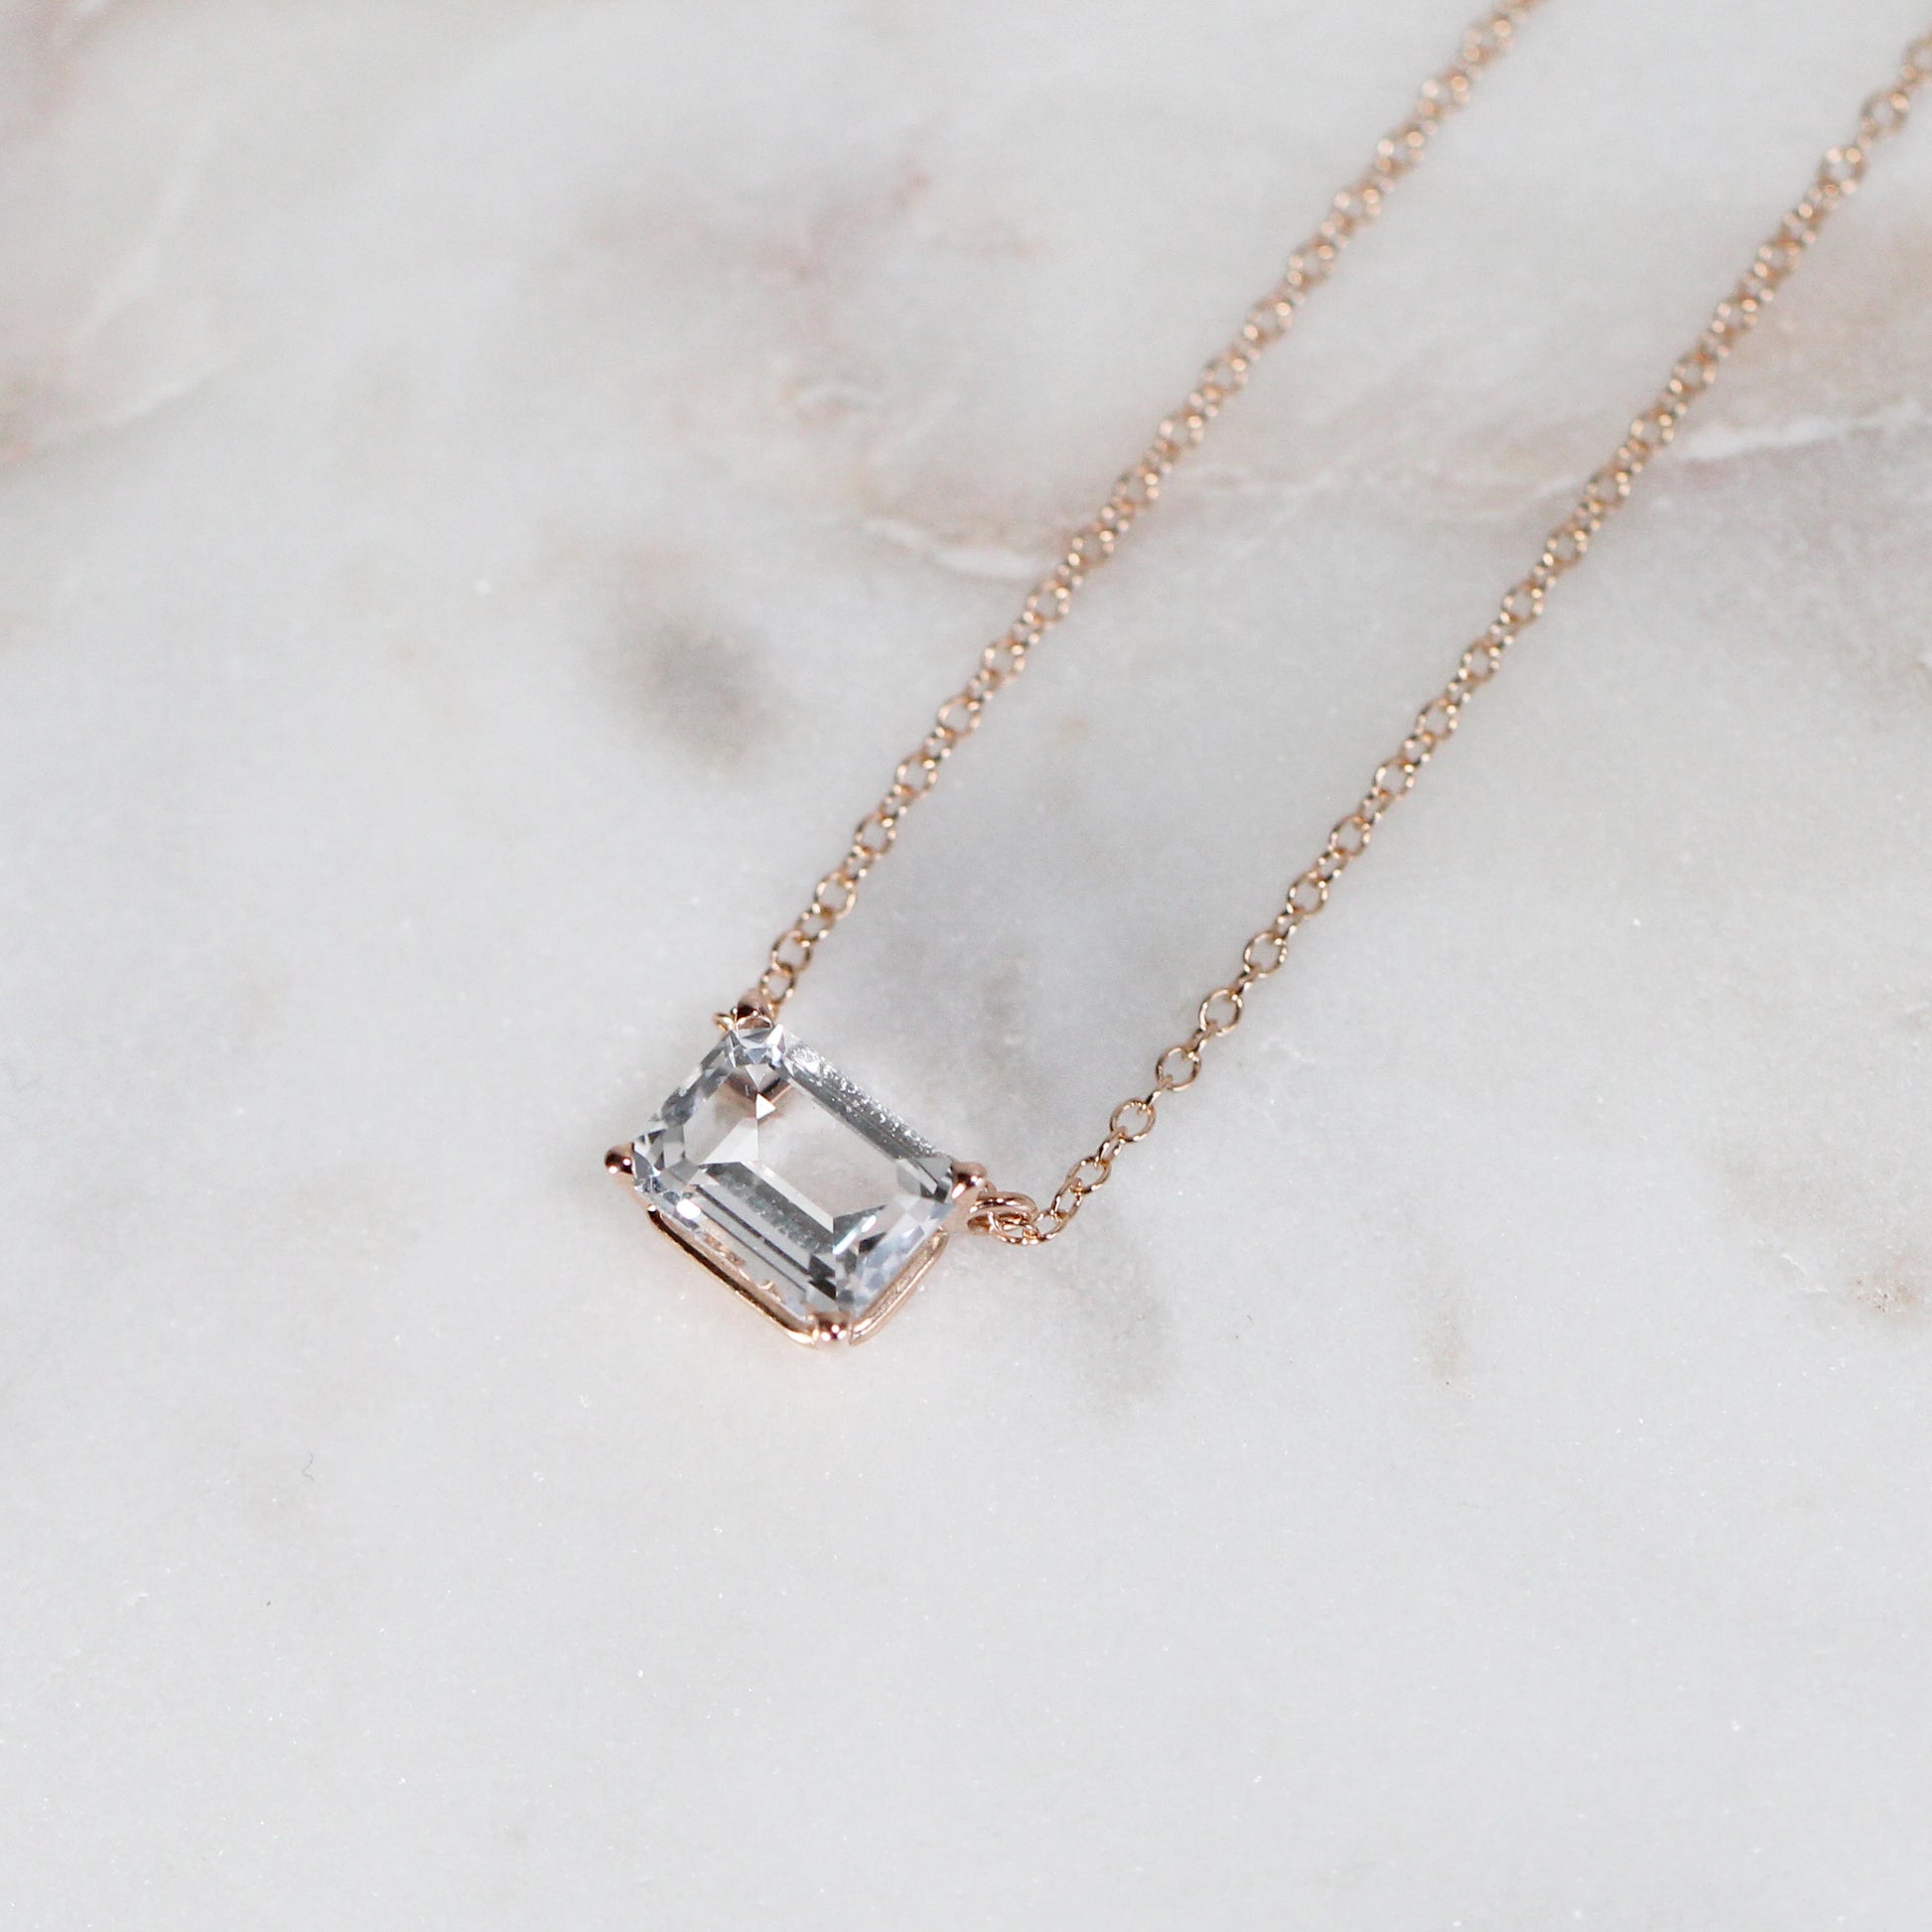 Emerald Cut Clear White Topaz Pendant Necklace - 14k Gold of your choice - Midwinter Co. Alternative Bridal Rings and Modern Fine Jewelry